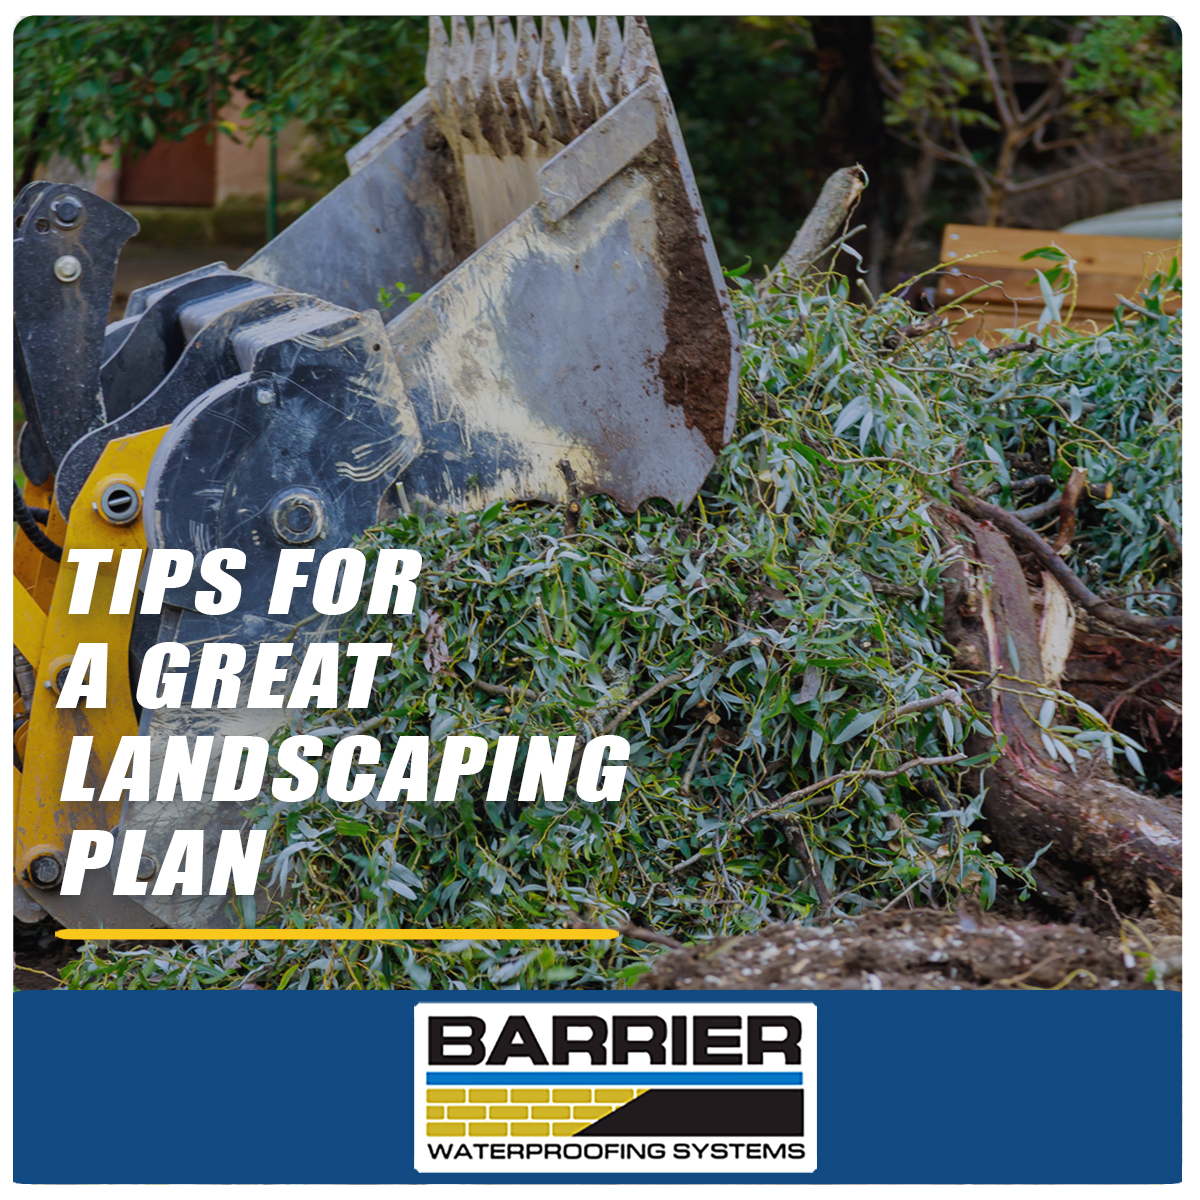 Tips-For-A-Great-Landscaping-Plan